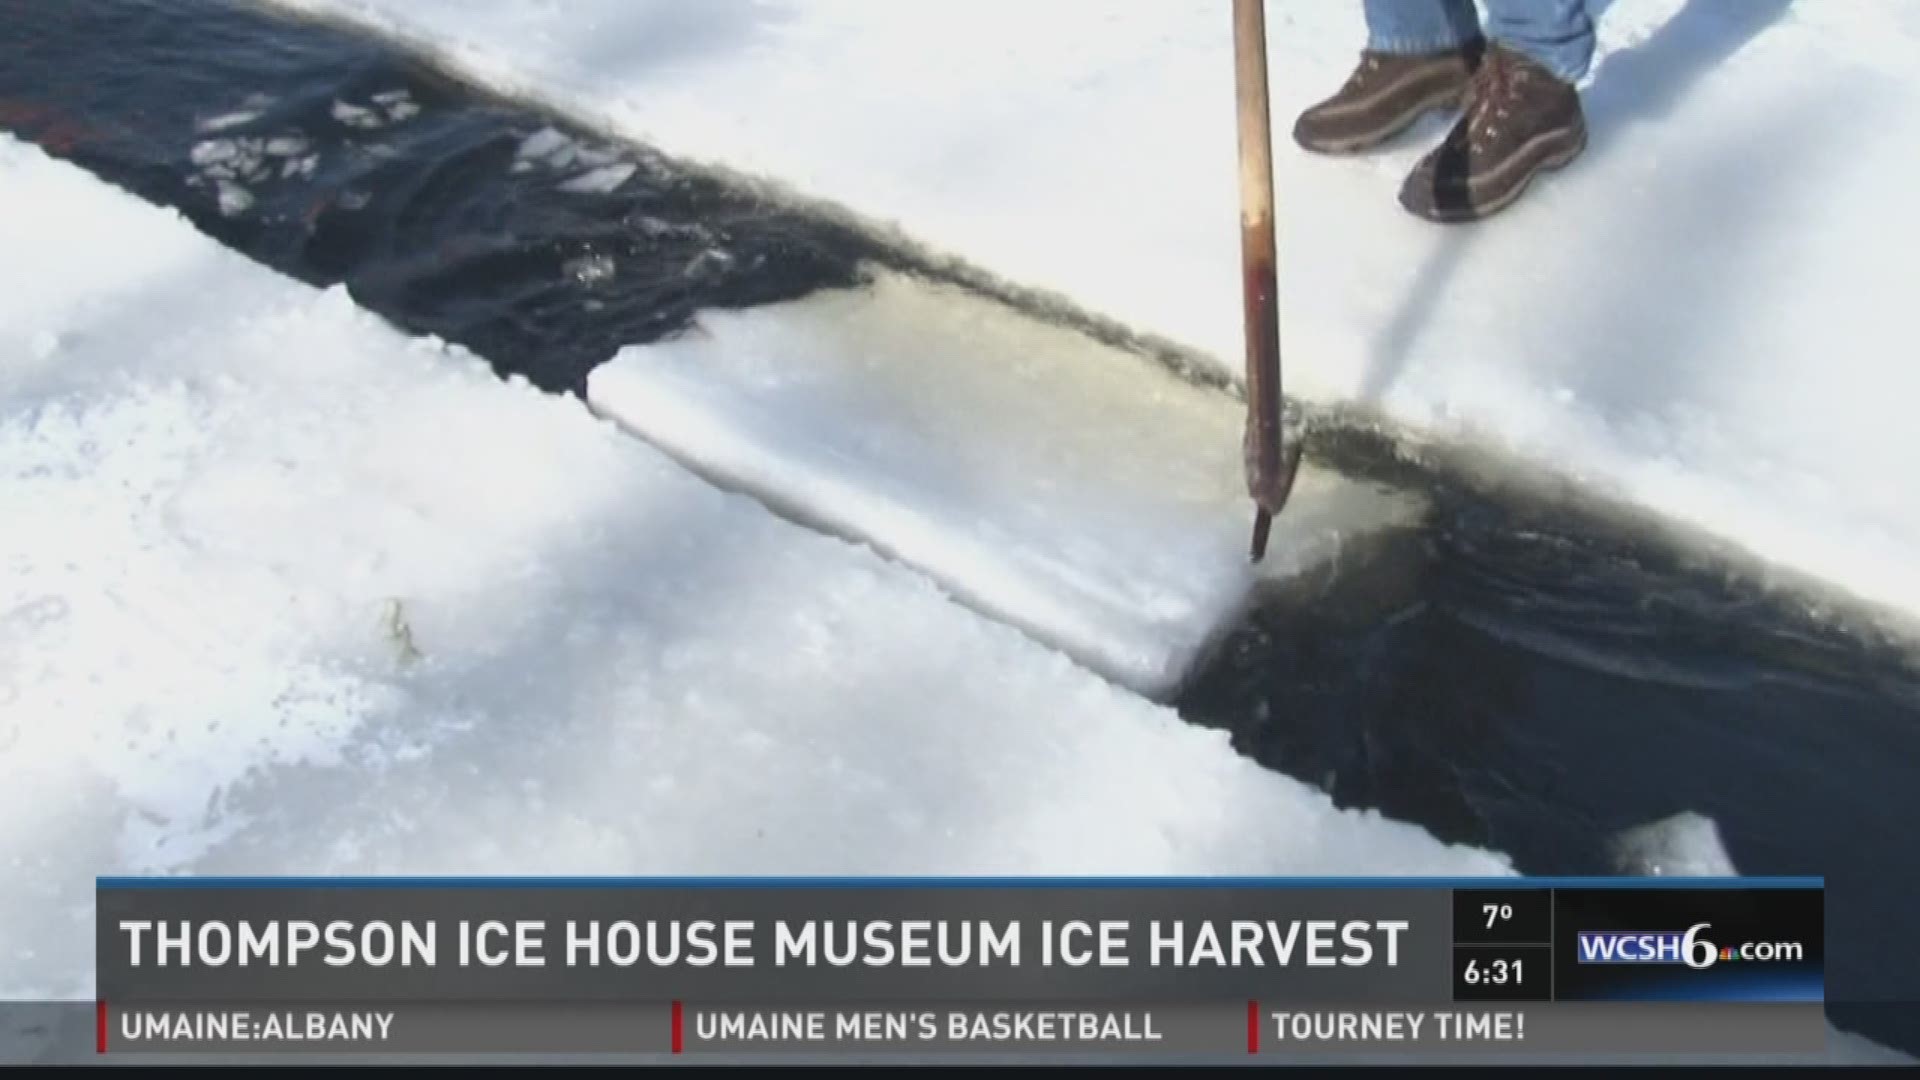 Thompson Ice House museums hosts annual ice harvest.